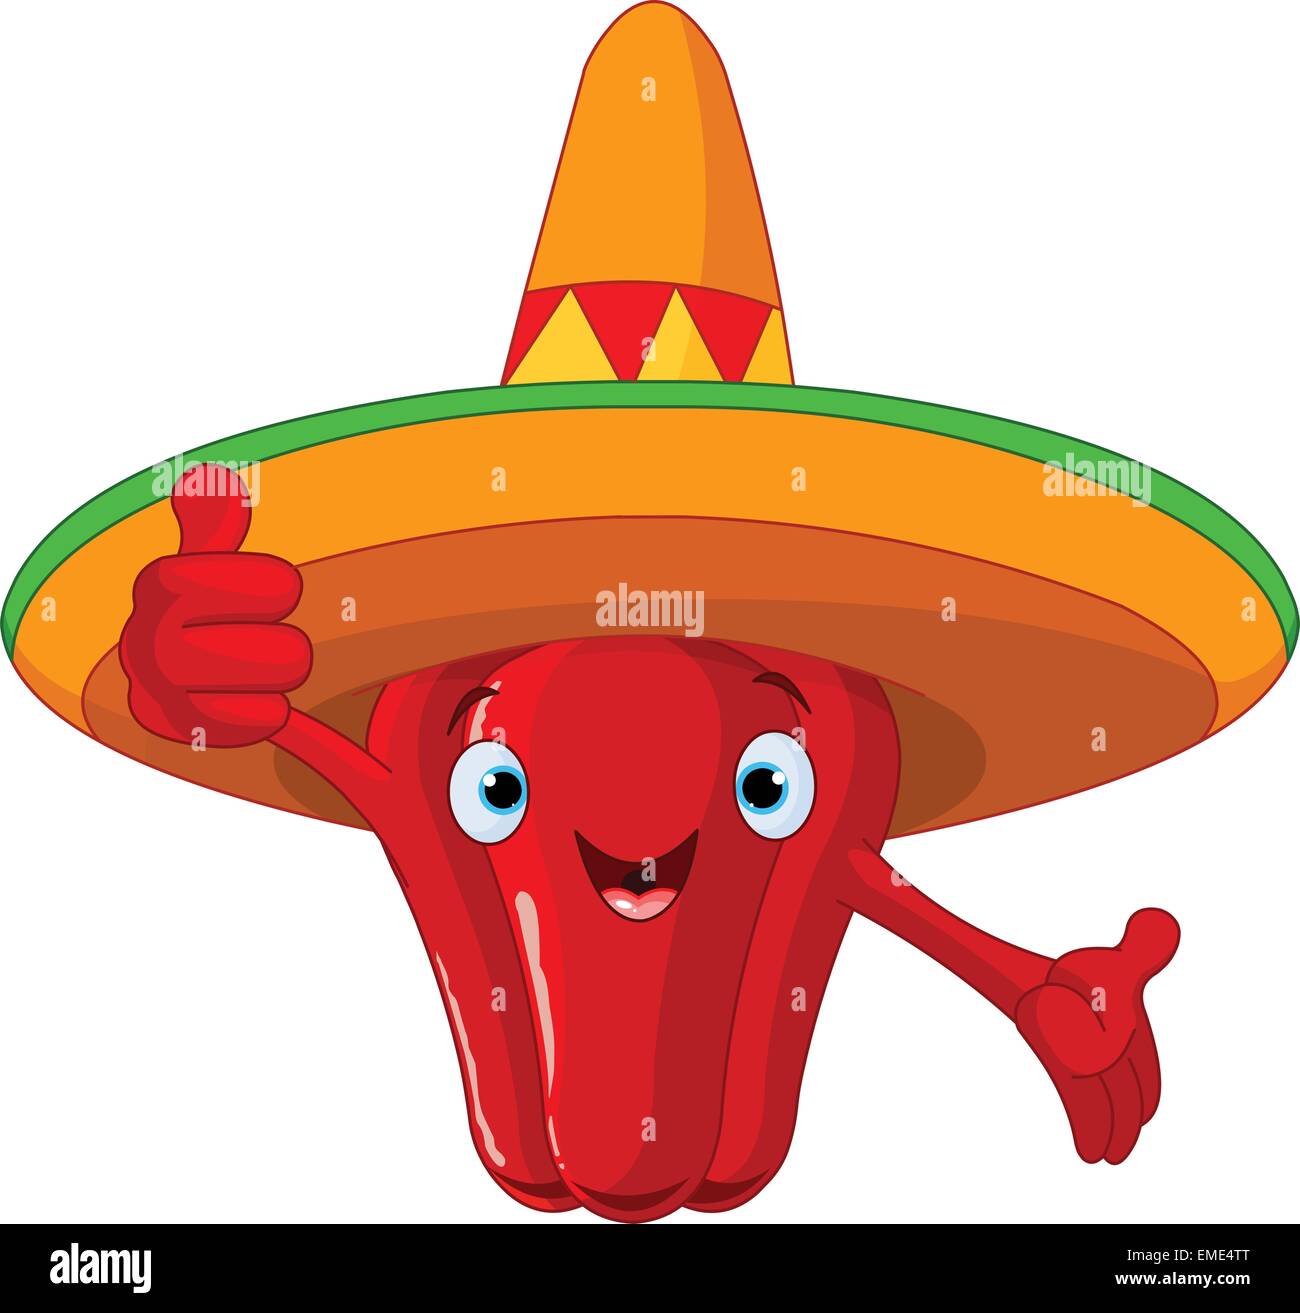 Red Hot Chili Pepper Character Stock Vector